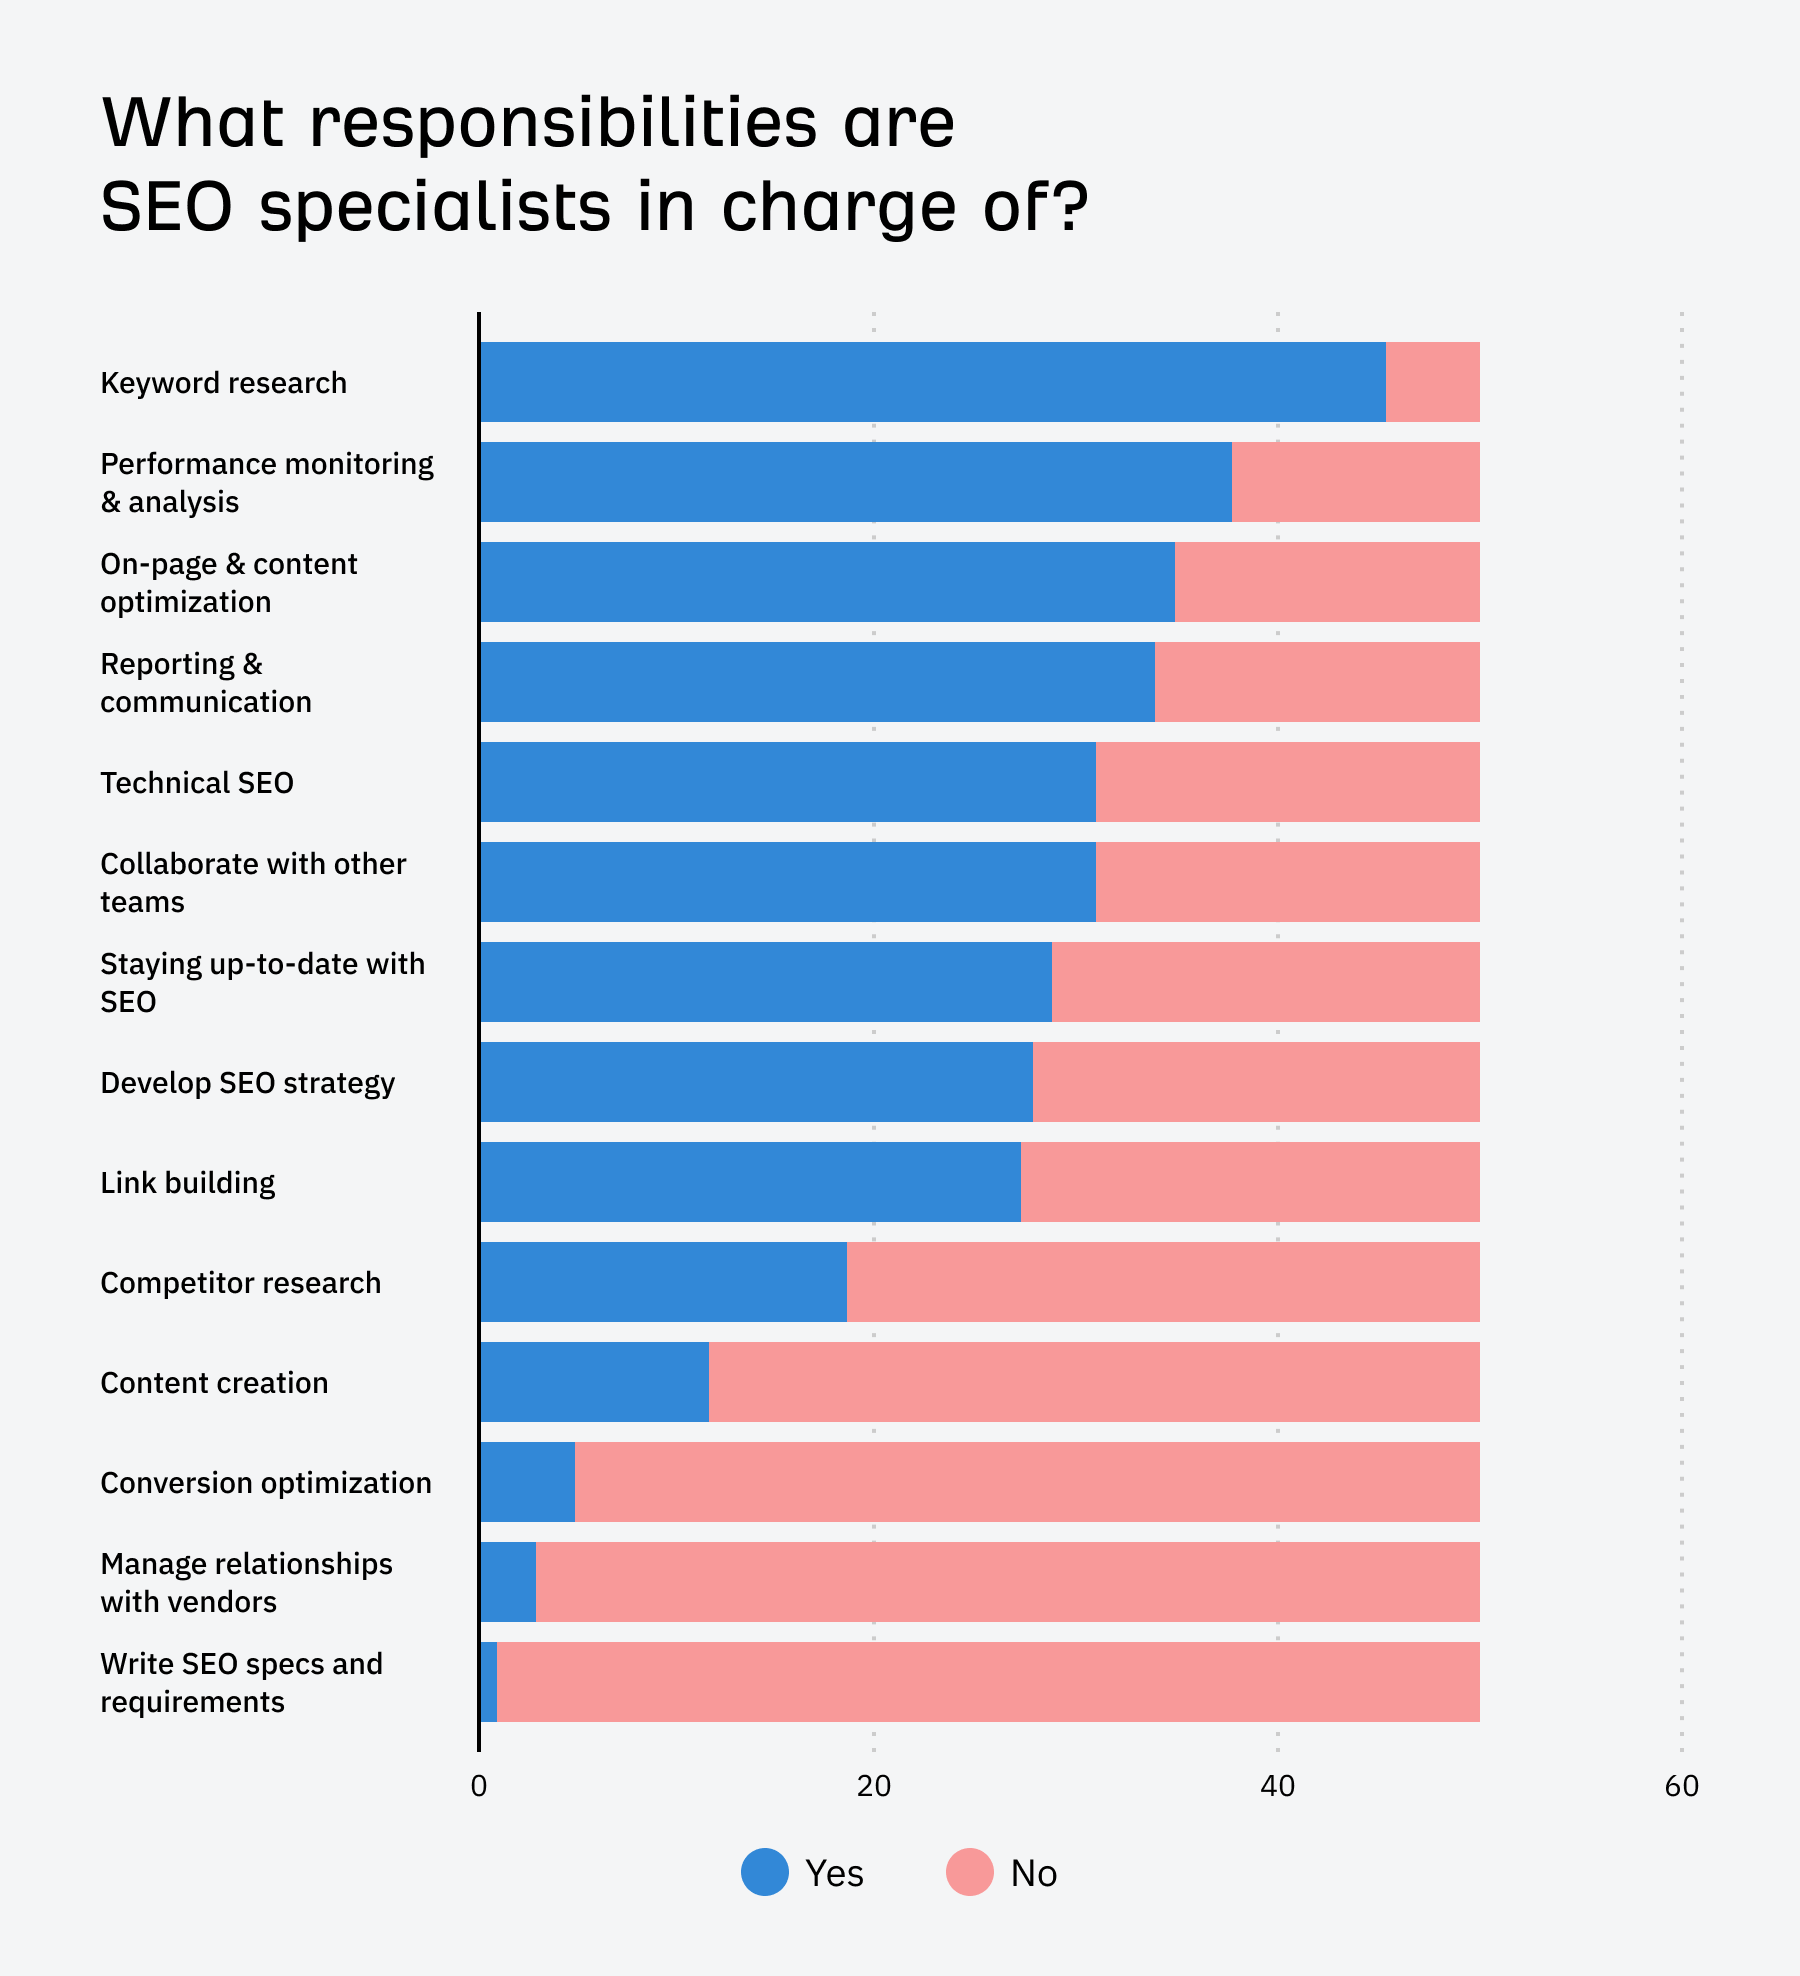 Chart showing responsibilities SEO specialists are in charge of